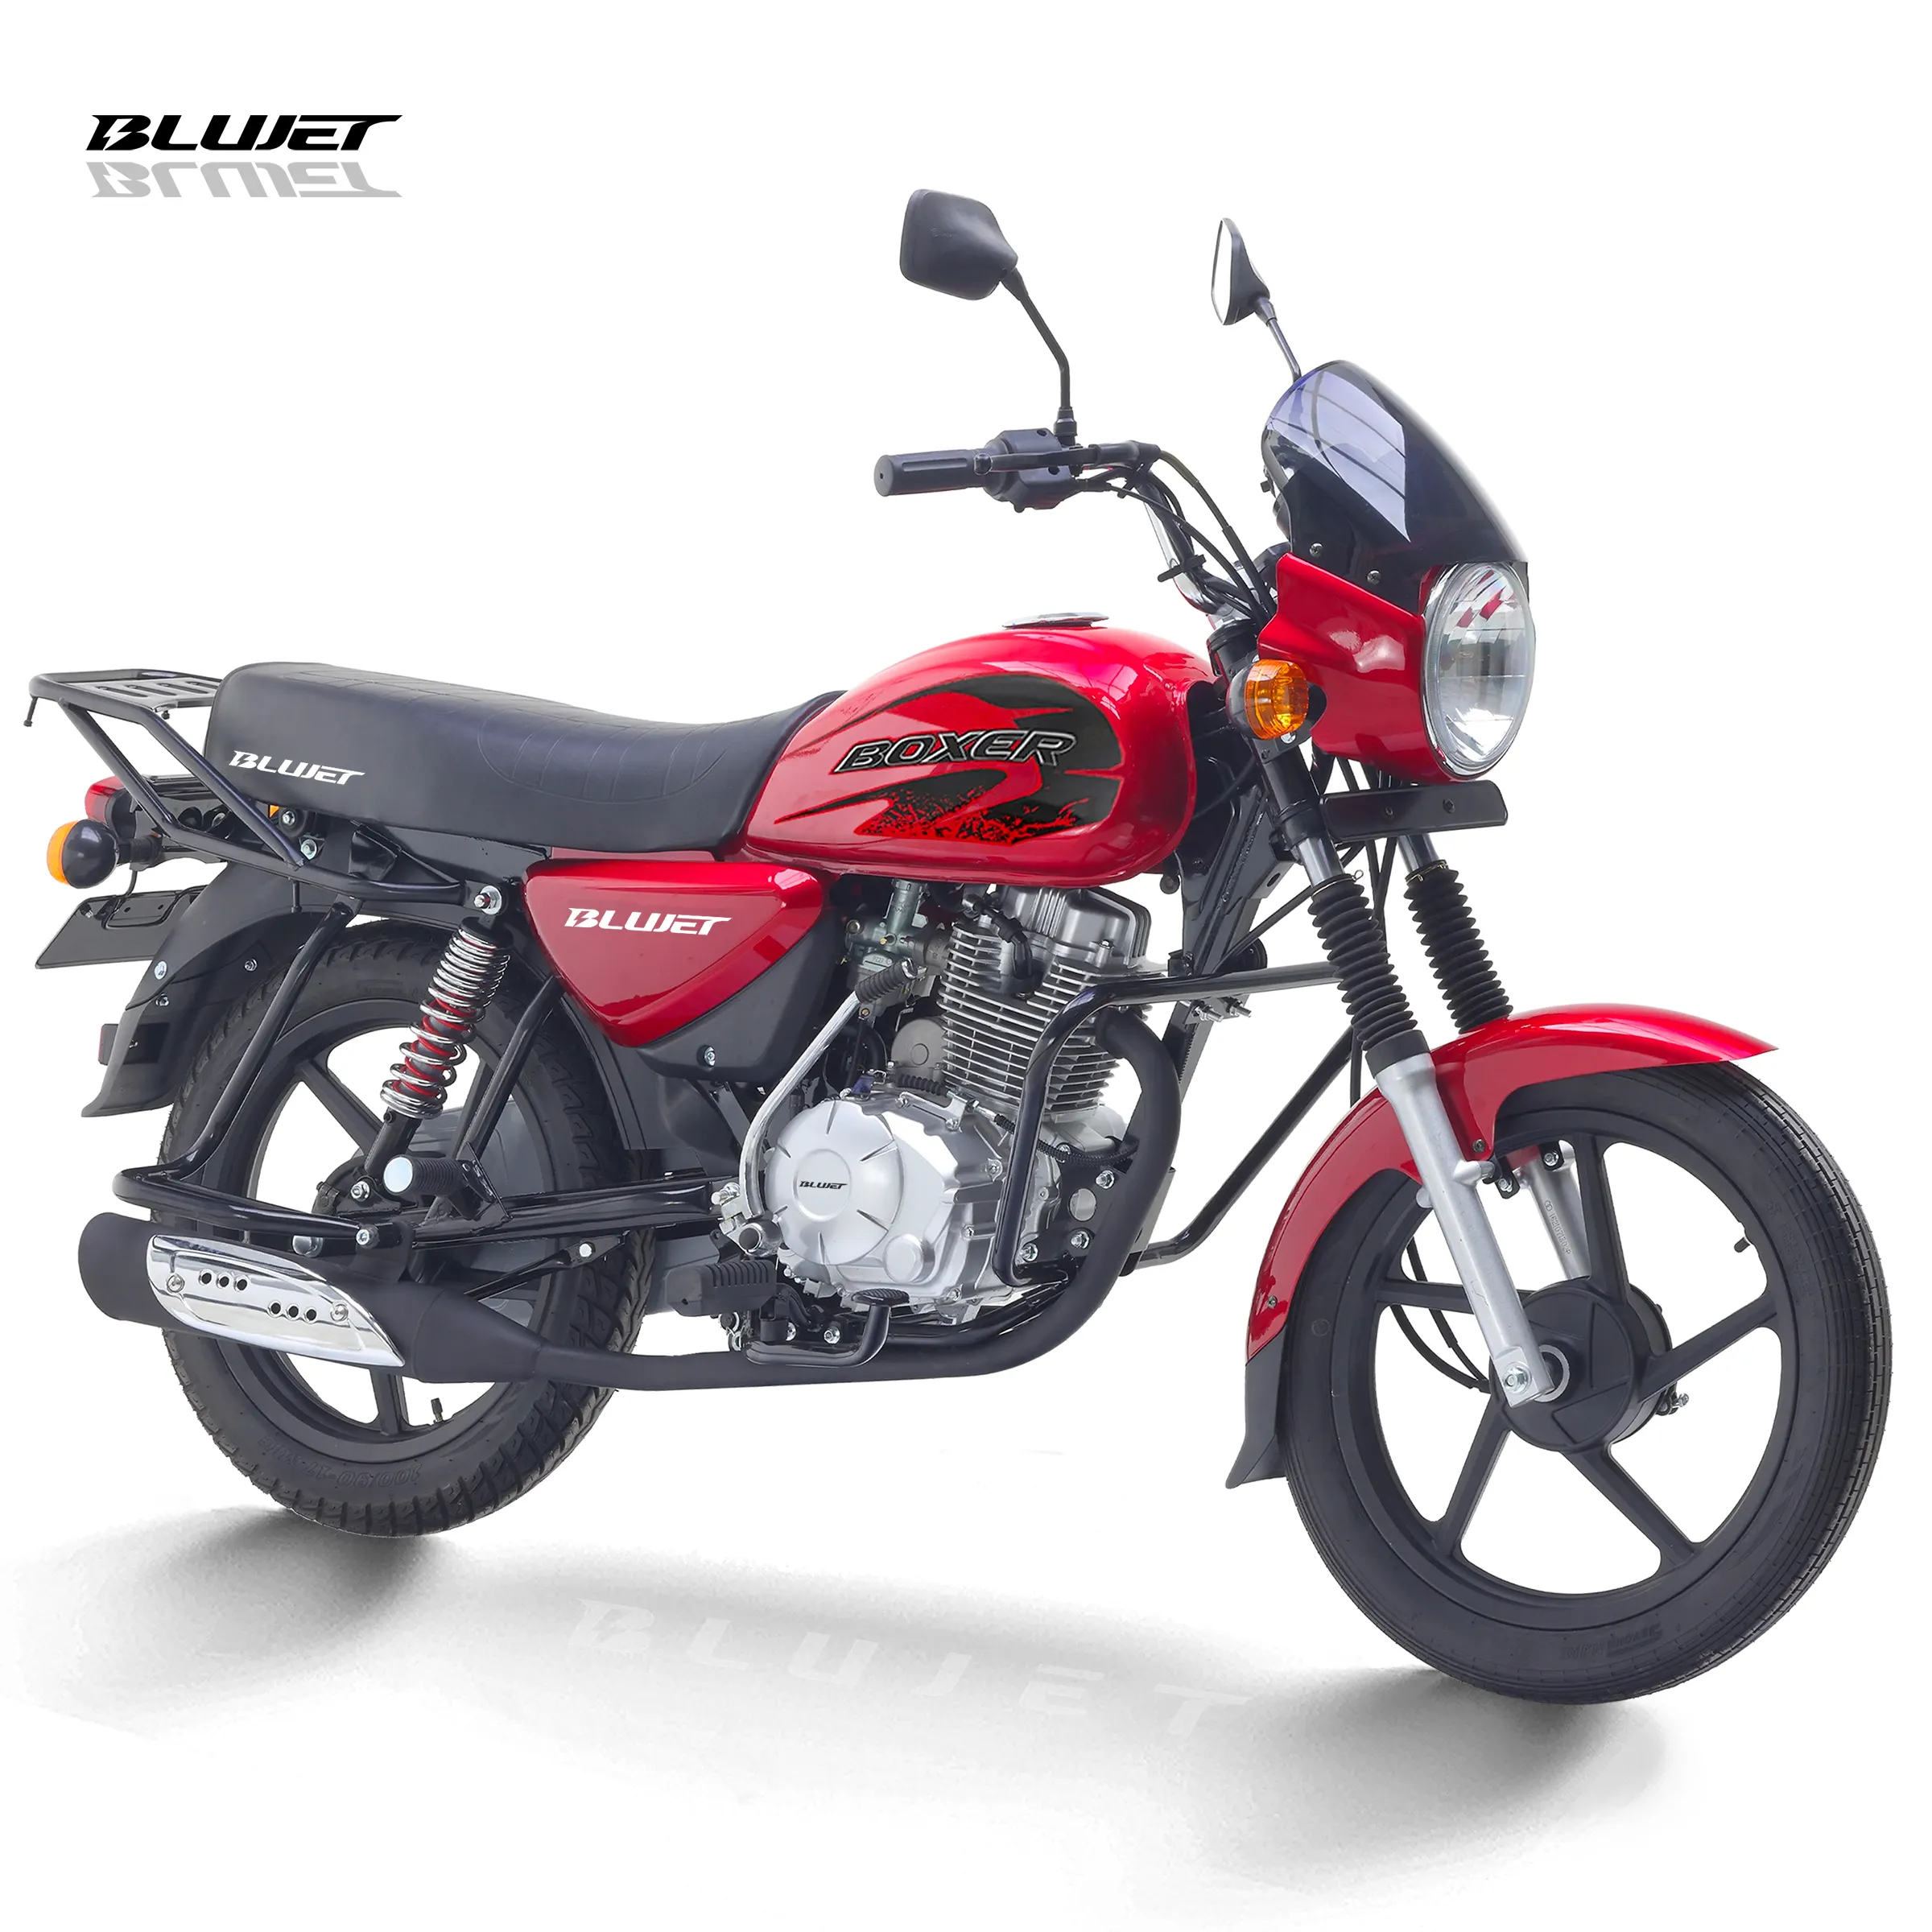 Boxer model Popular 100CC 110cc 150CC model street as Indian Bajaj motorcycle for sale in africa bolivia iraq